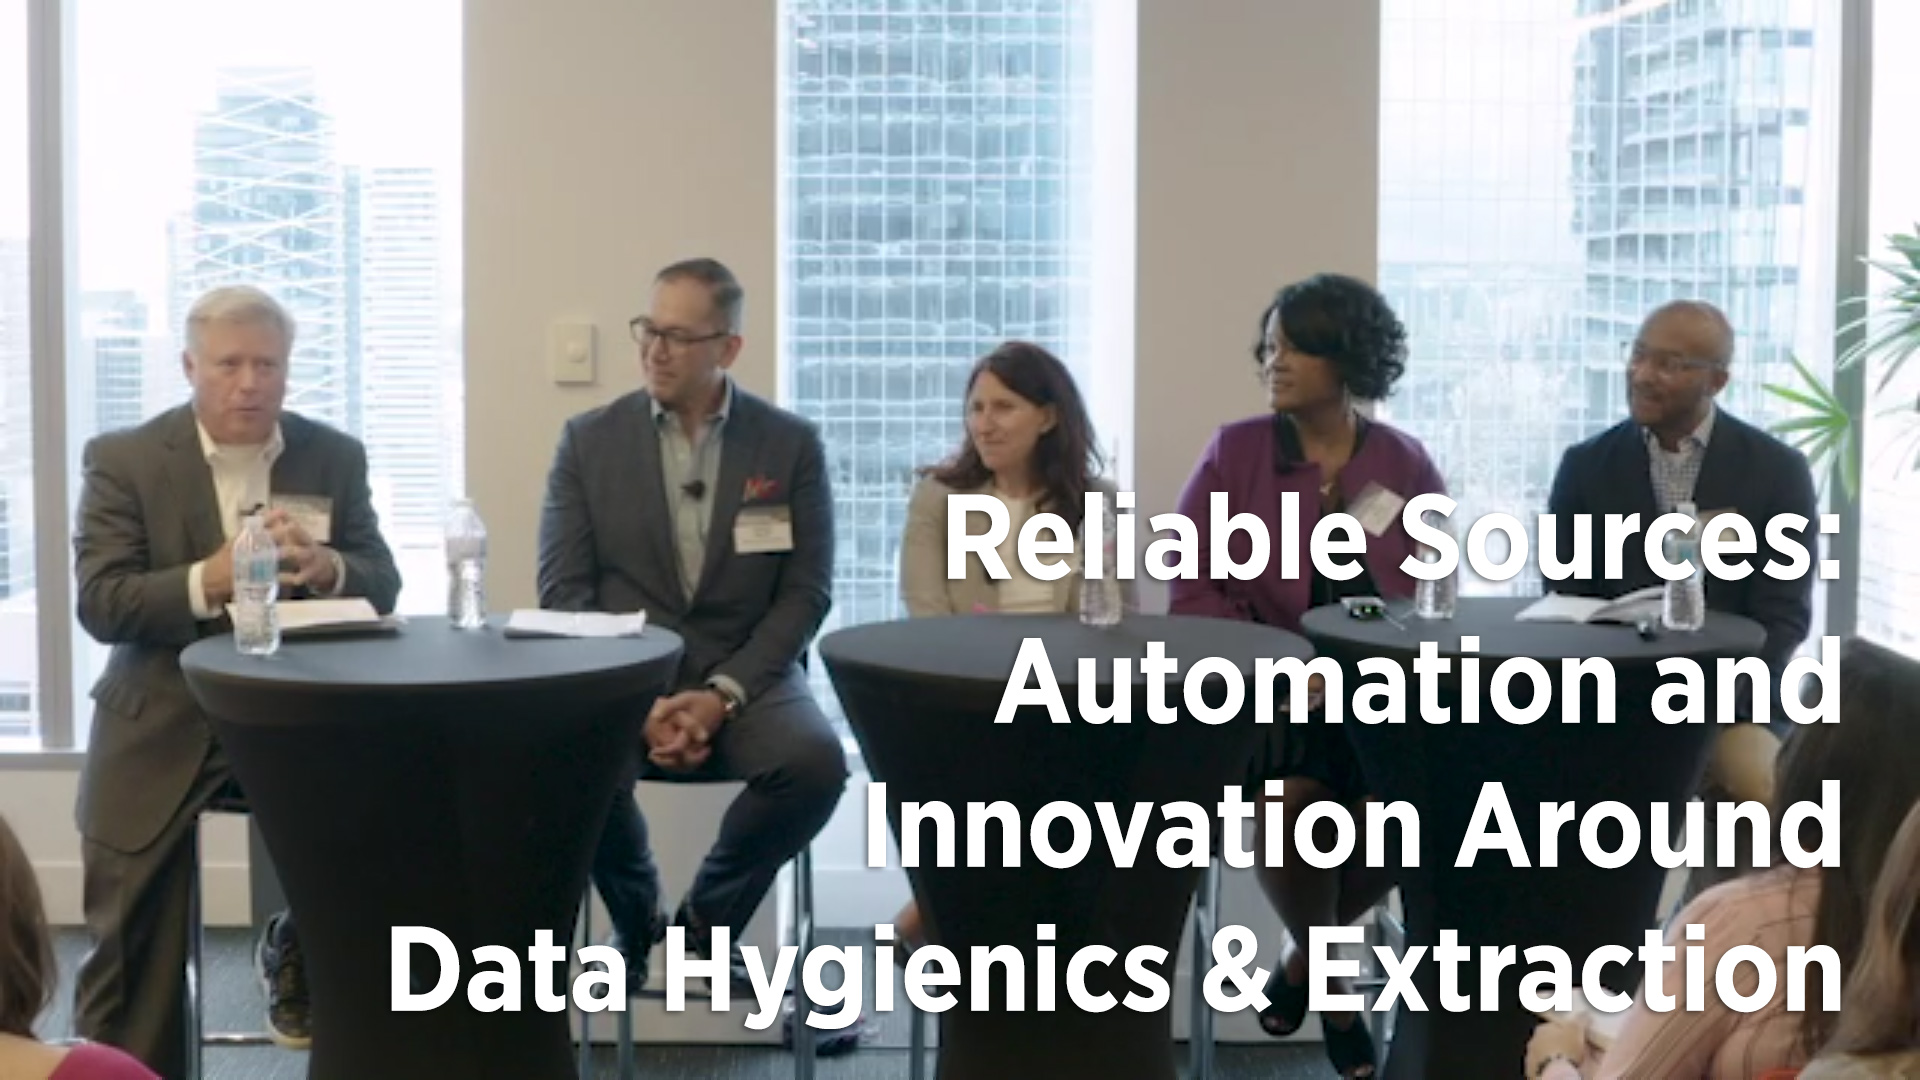 Reliable Sources: Automation and Innovation Around Data Hygienics & Extraction